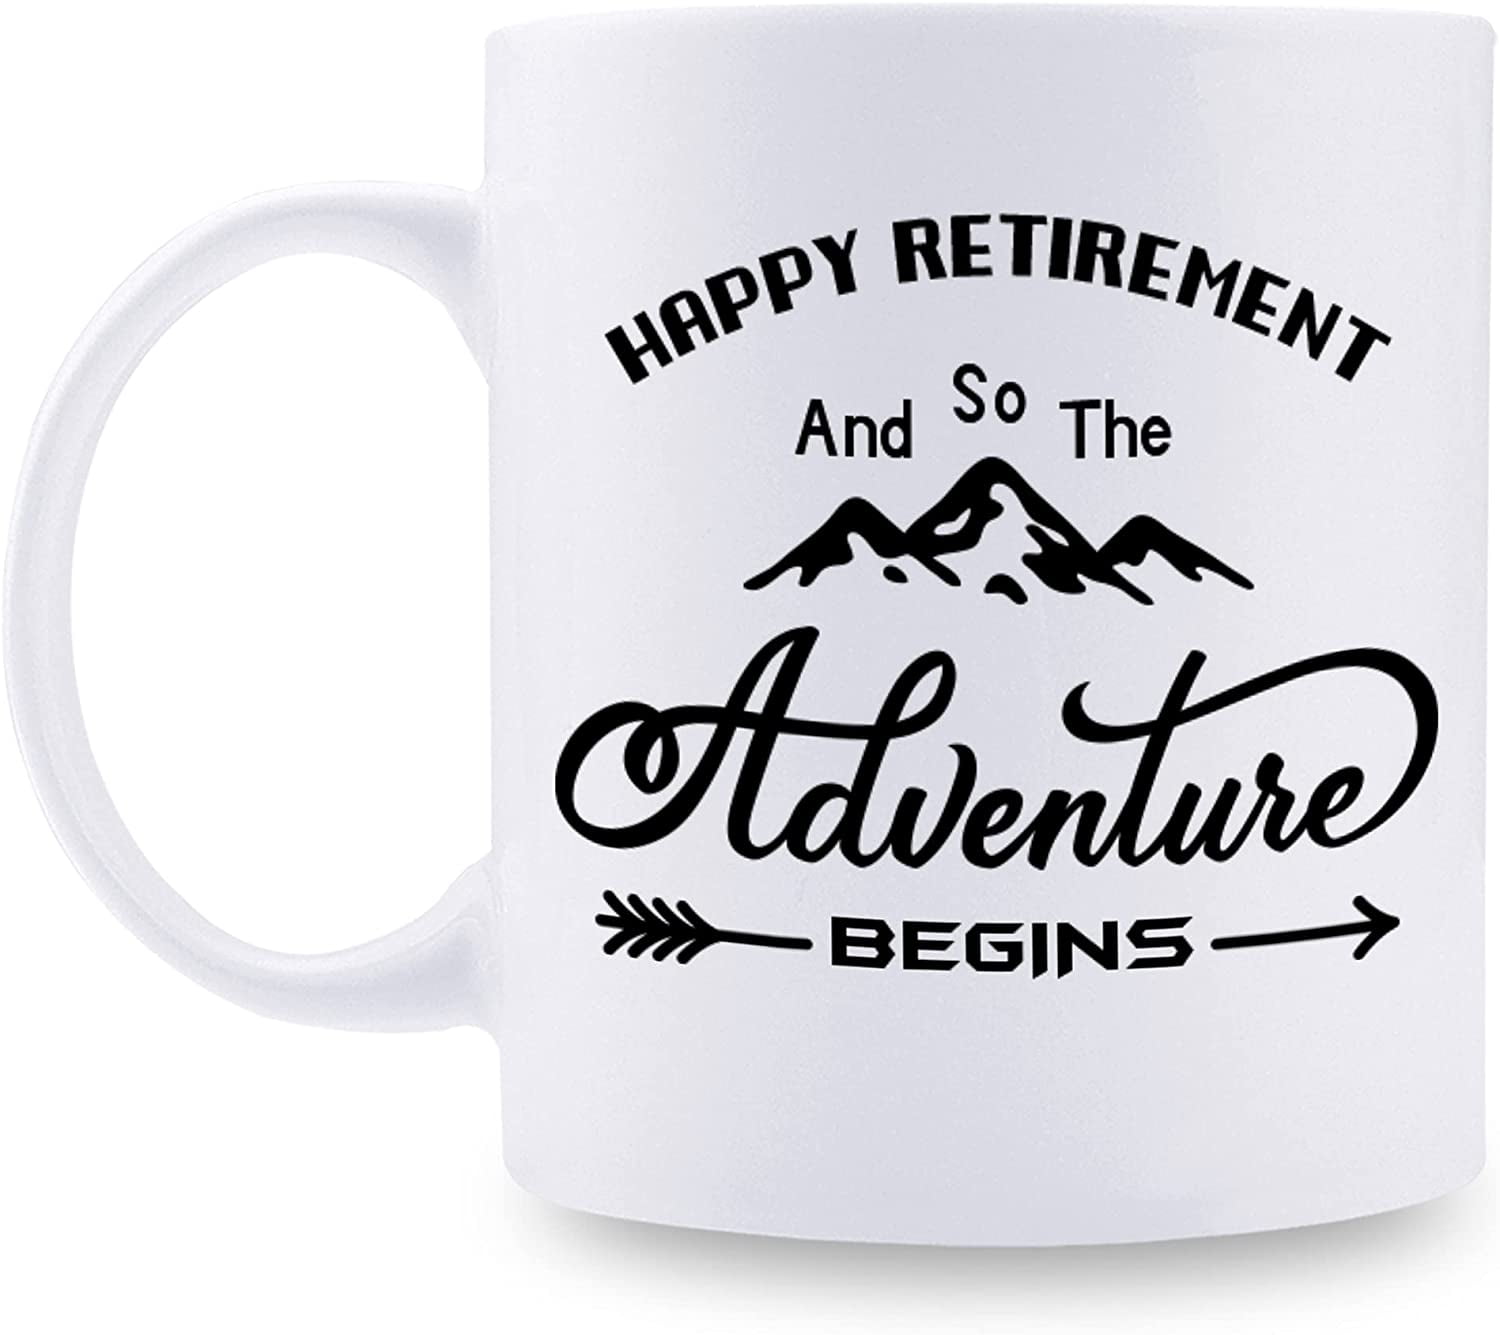  Gifts for Senior Citizens - Gifts for Elderly Men and Women -  Gifts for Grandfather and Grandmother - Gift for Older Men and Women -  Travel Coffee Mug : Sports & Outdoors